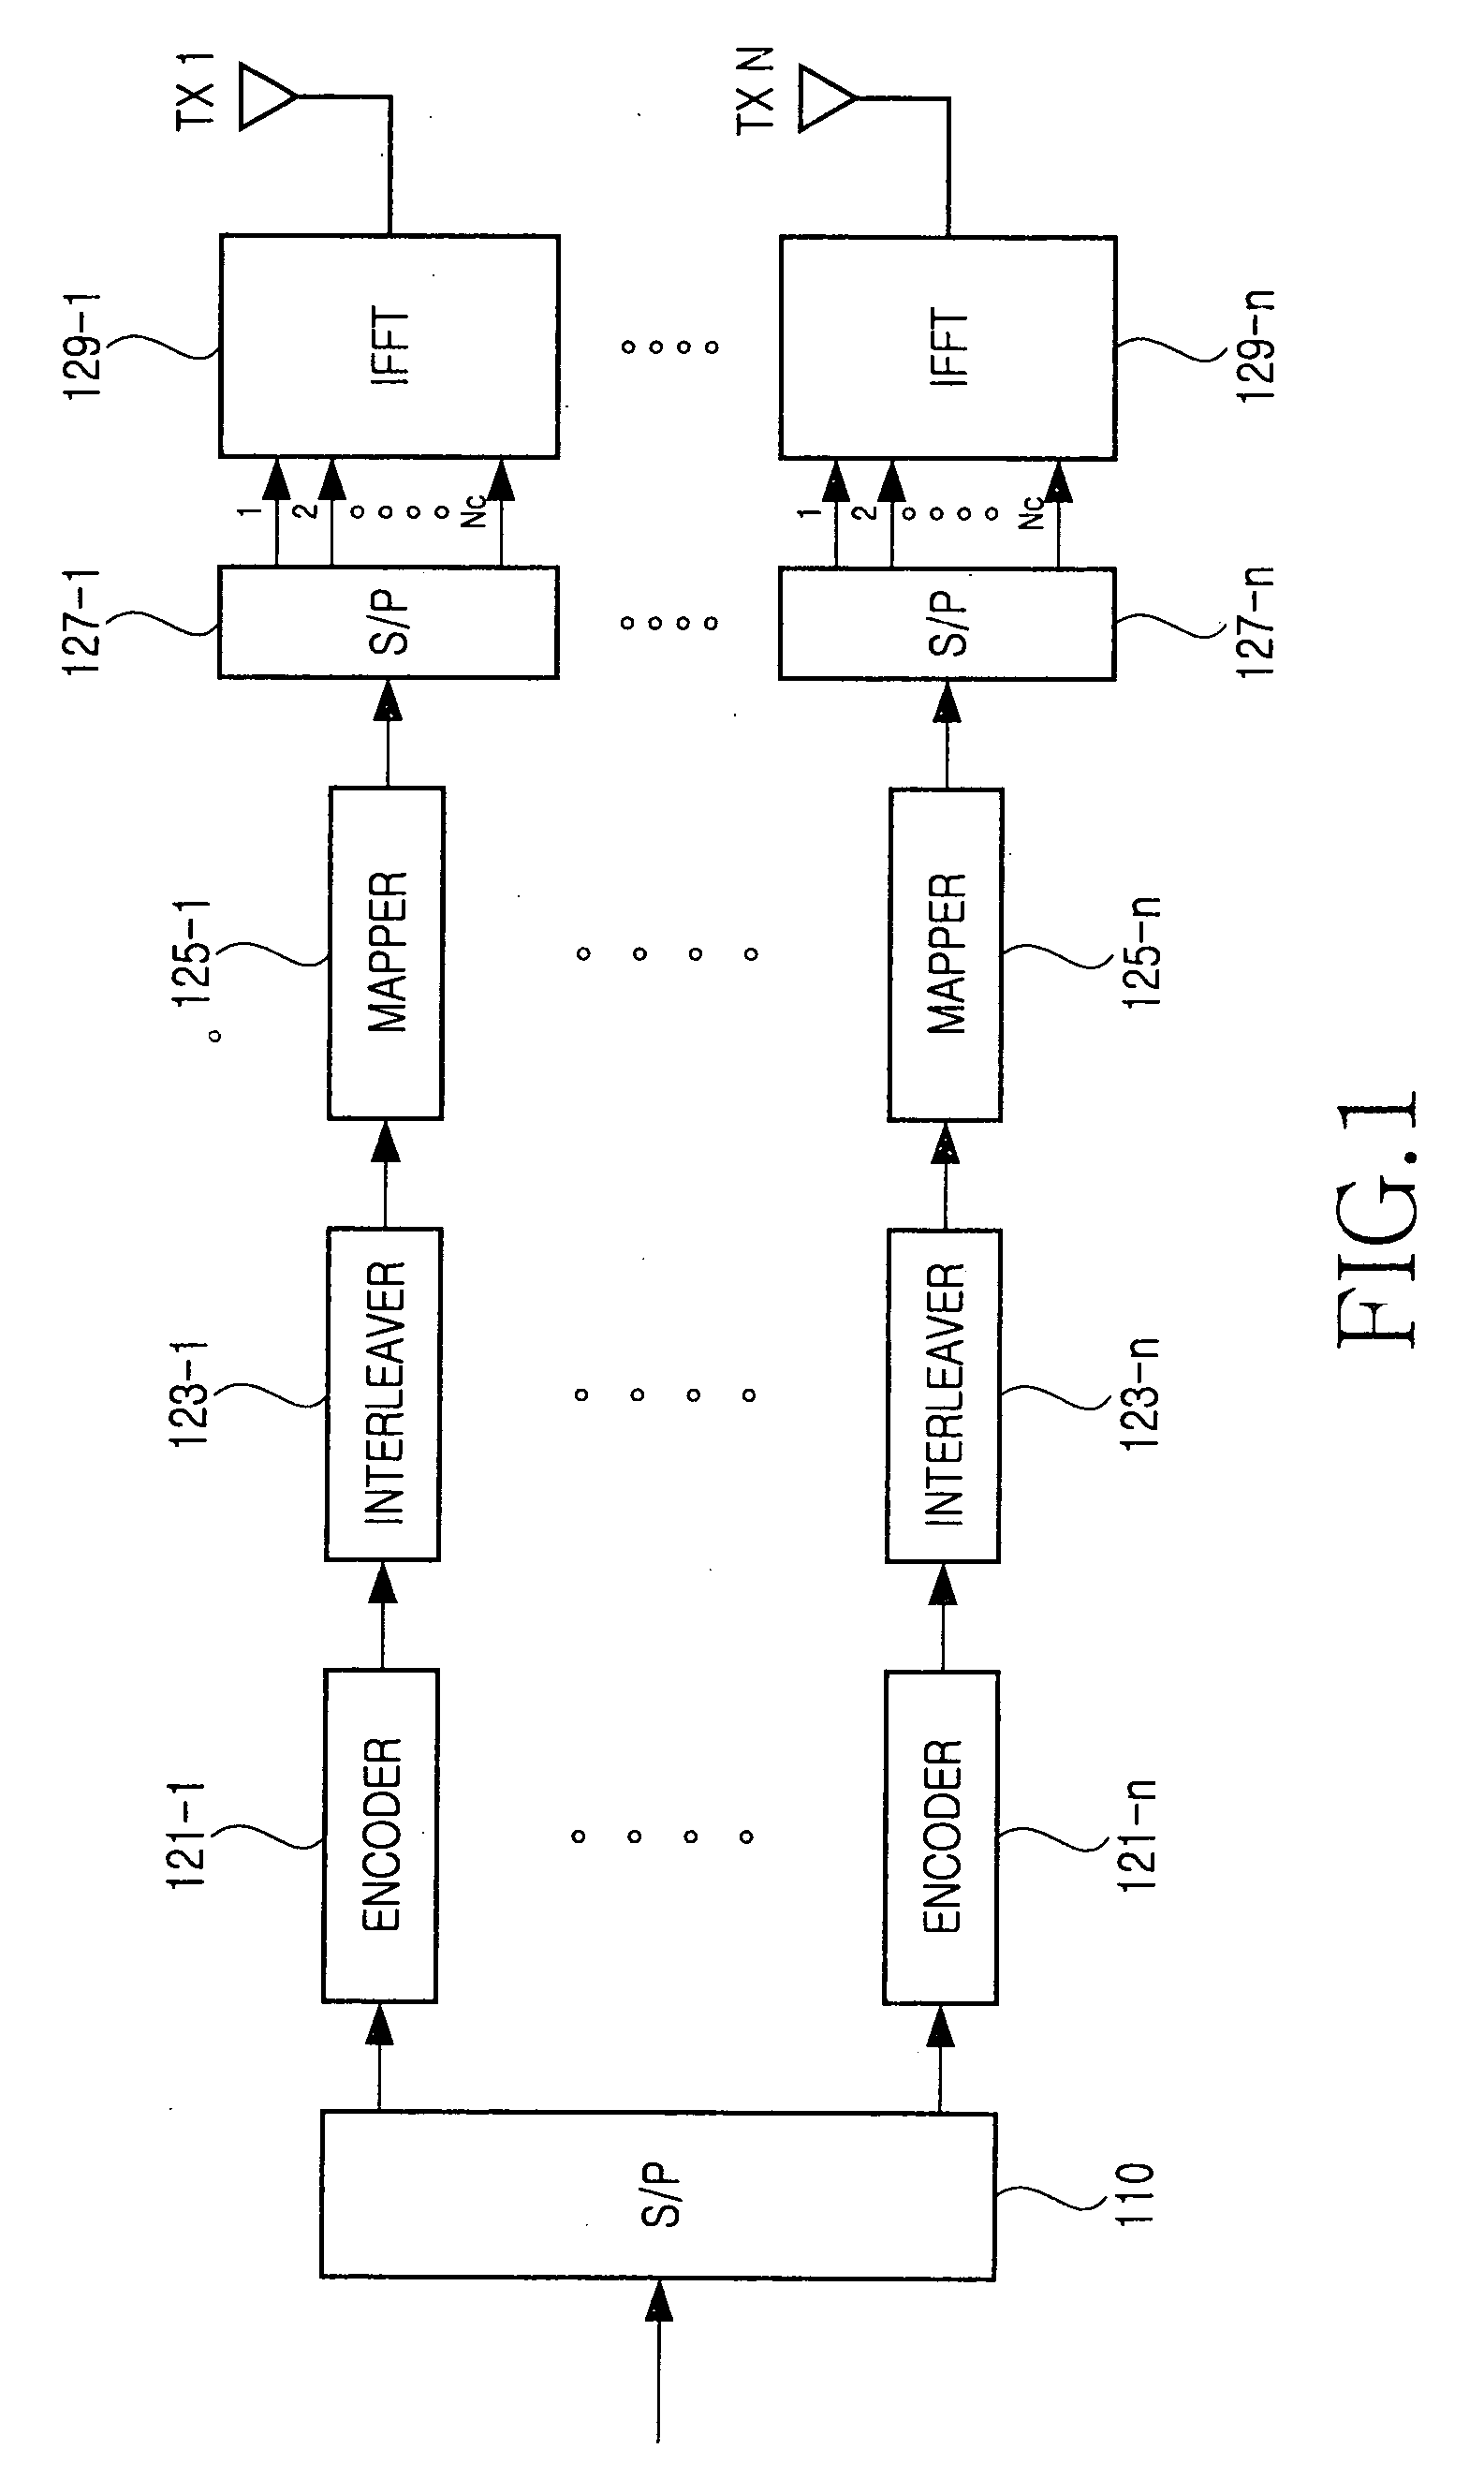 Method for detecting and decoding a signal in a MIMO communication system